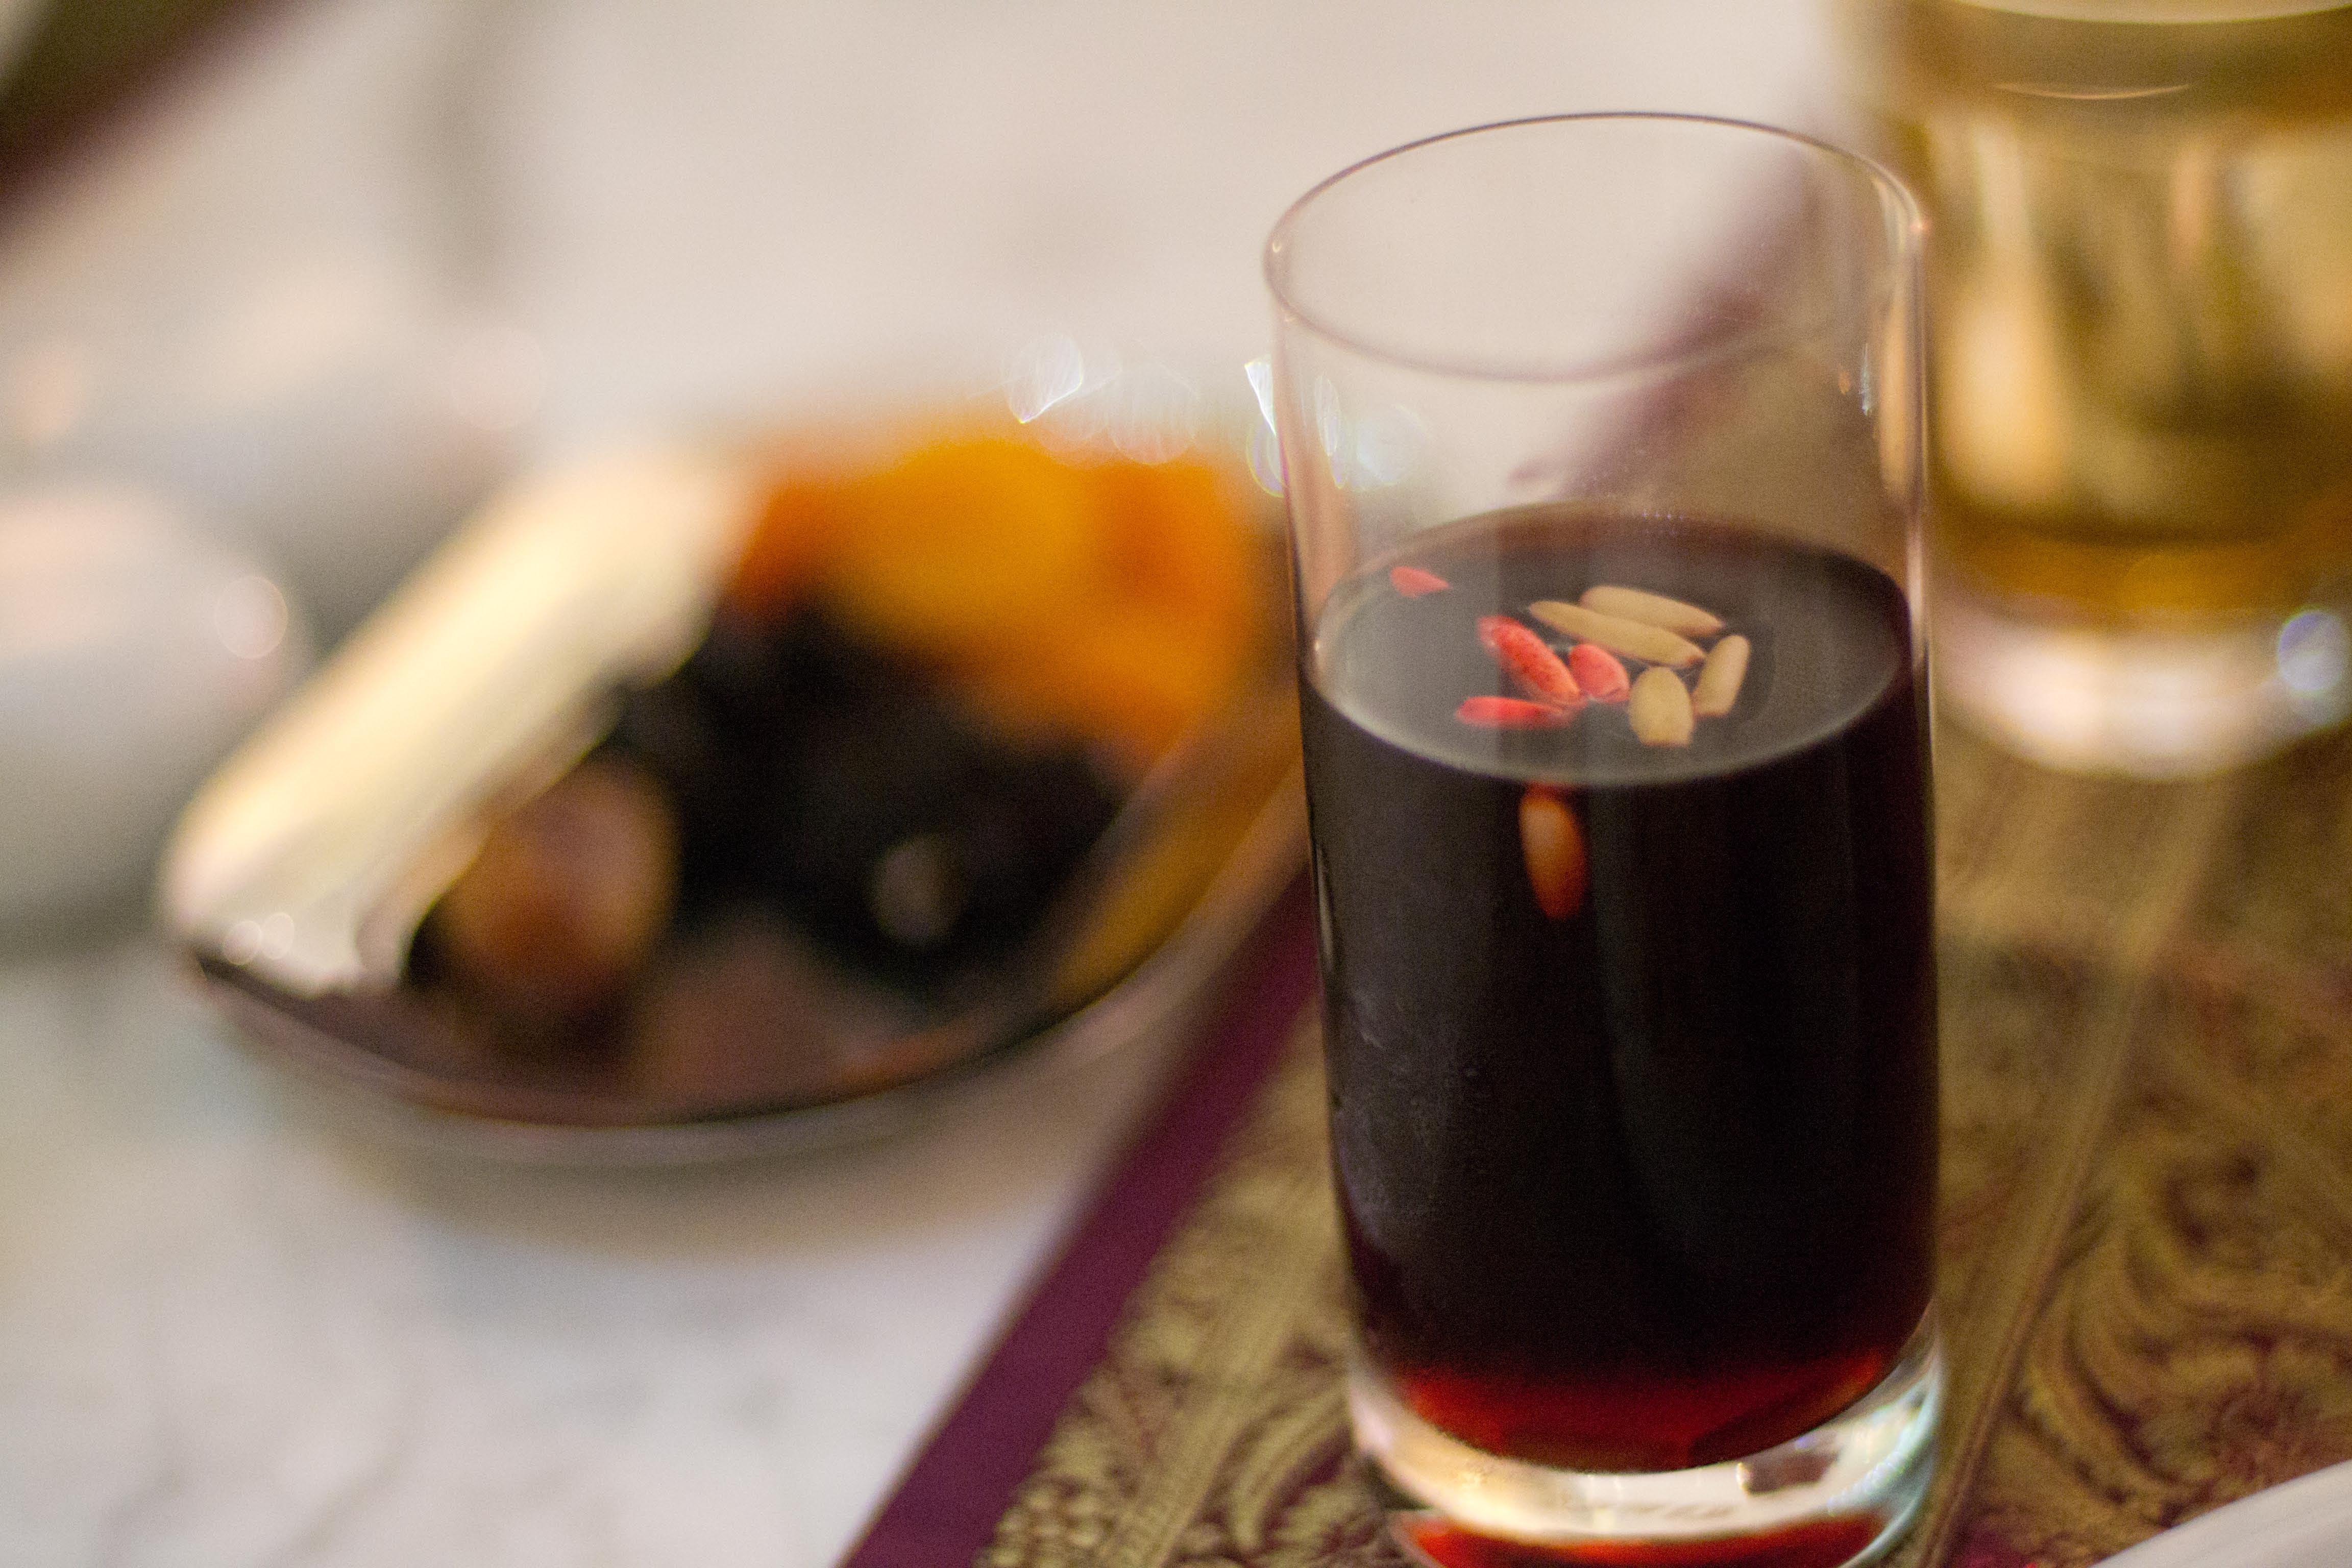 Jallab juice is made of dates, grape molasses, and rose water (WikiMedia)